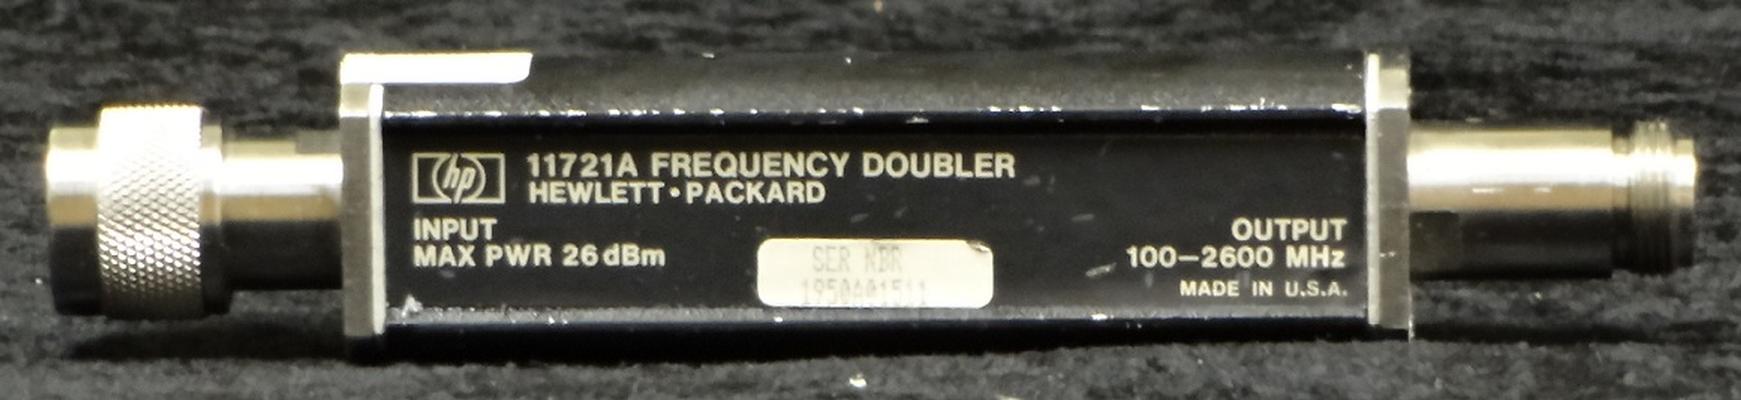 Agilent-HP 11721A Frequency Doubler